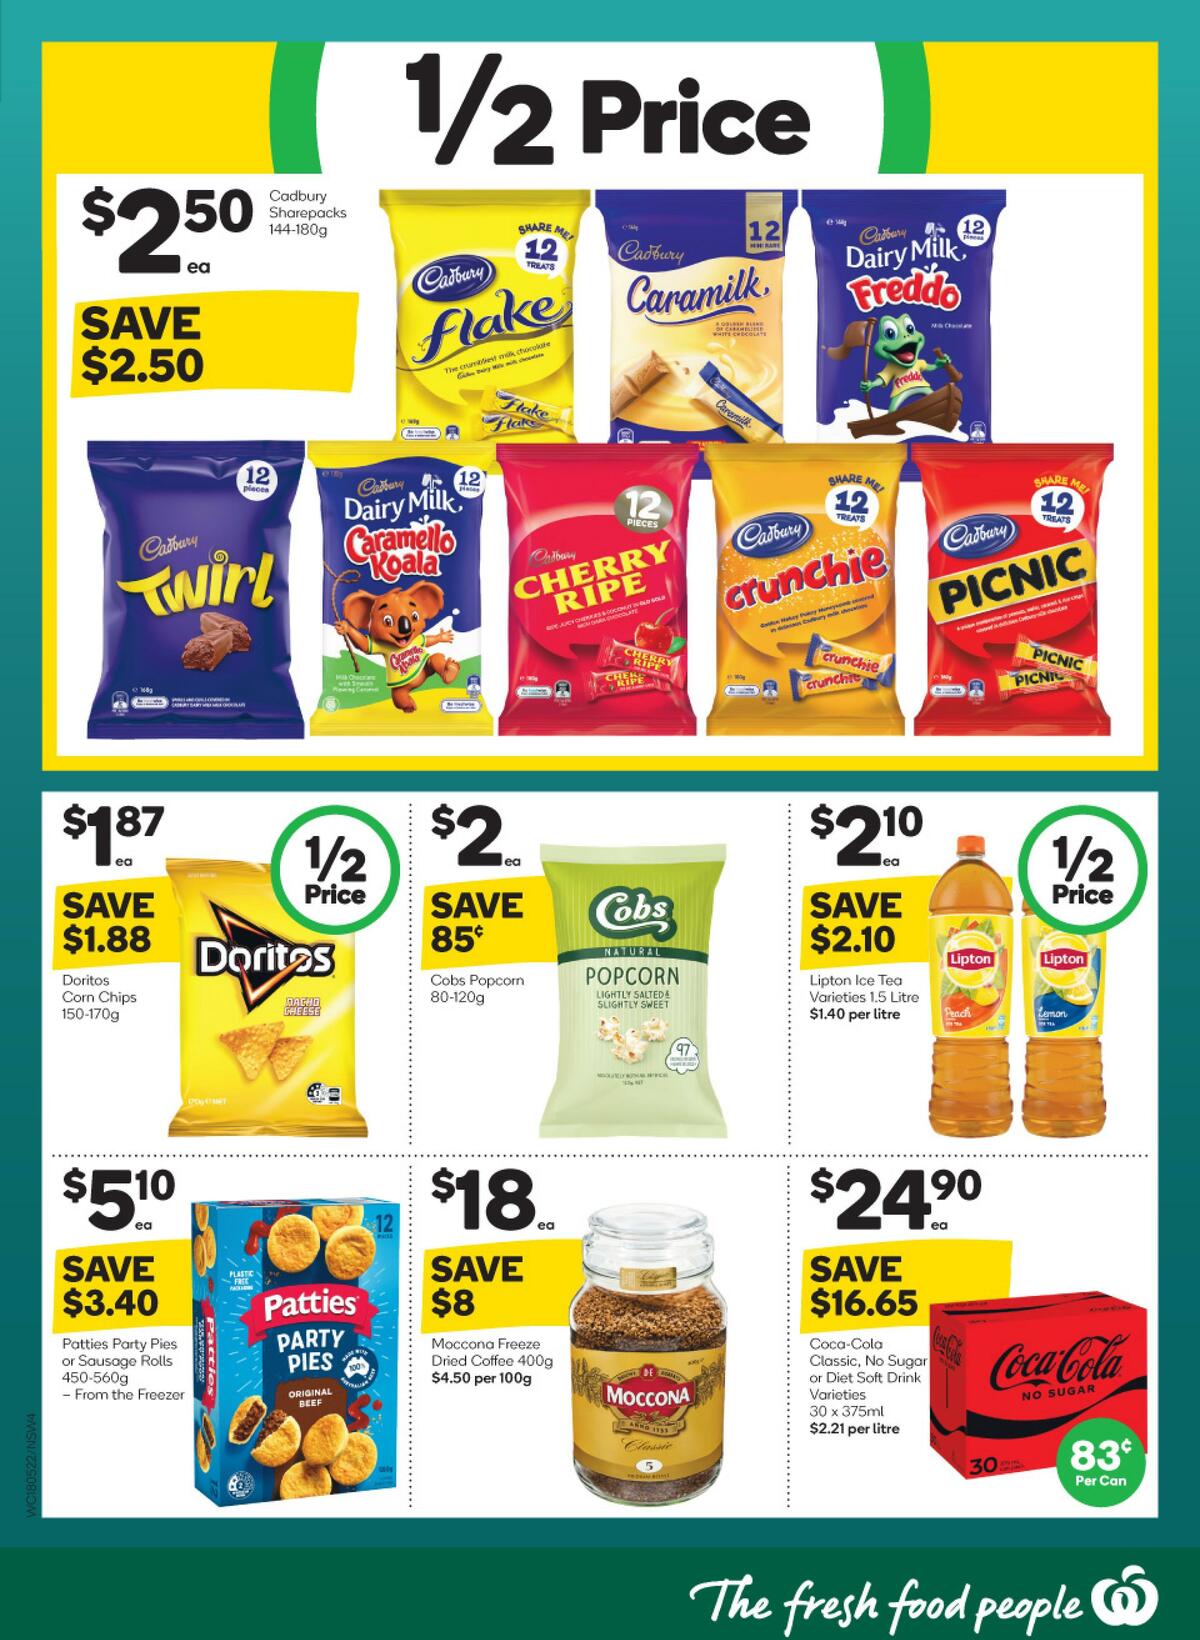 Woolworths Catalogues from 18 May